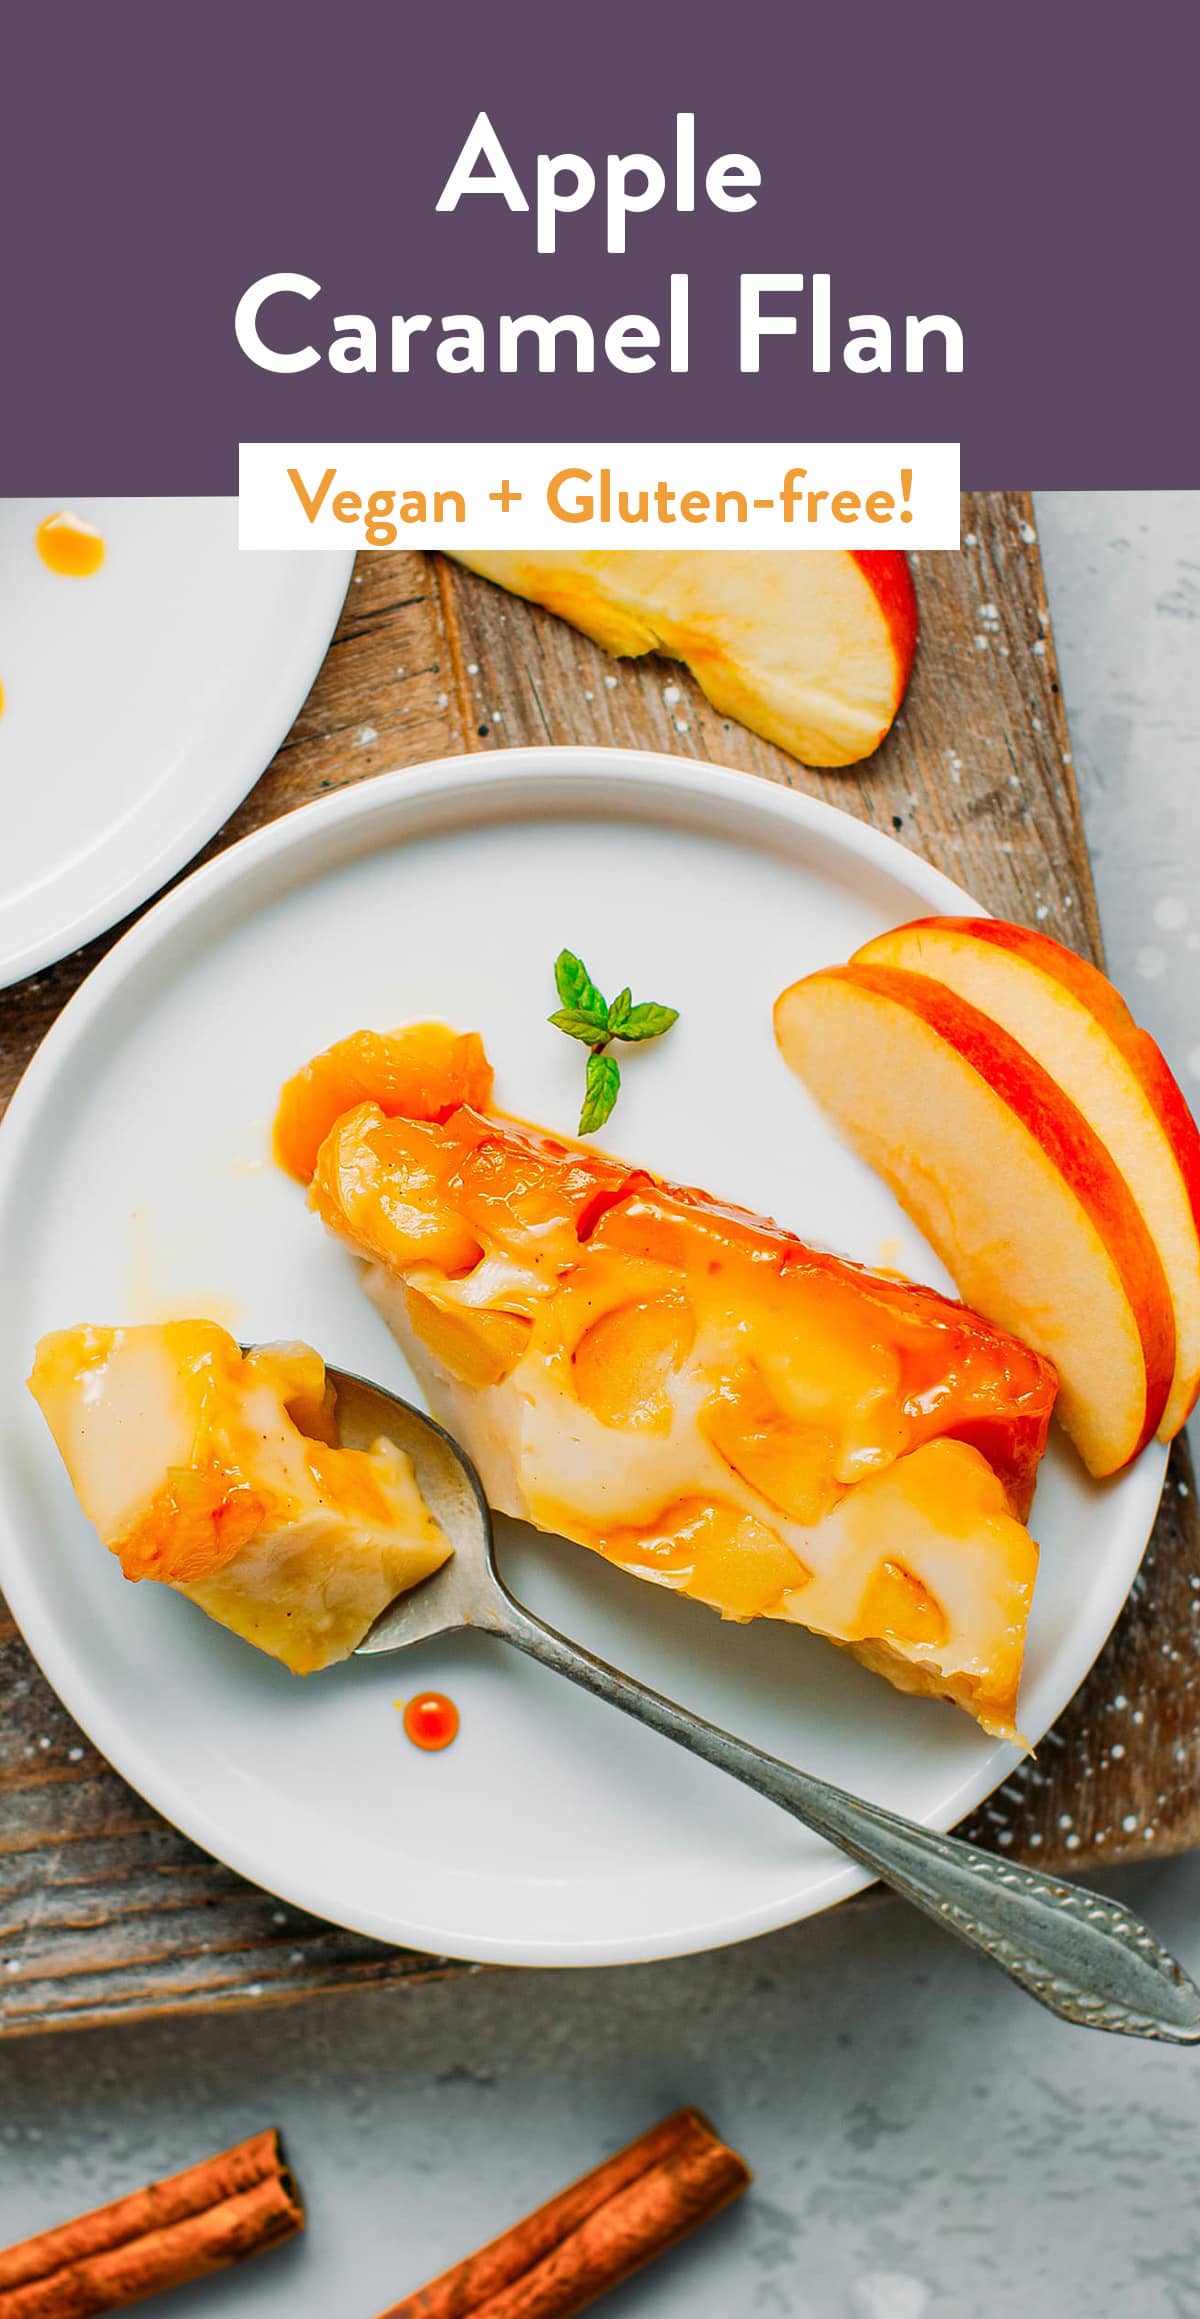 Melty chunks of cinnamon apples meet salted caramel and a creamy vanilla custard in this plant-based, gluten-free dessert! Just 8-ingredient, easy, and delicious! #apple #dessert #plantbased #vegan